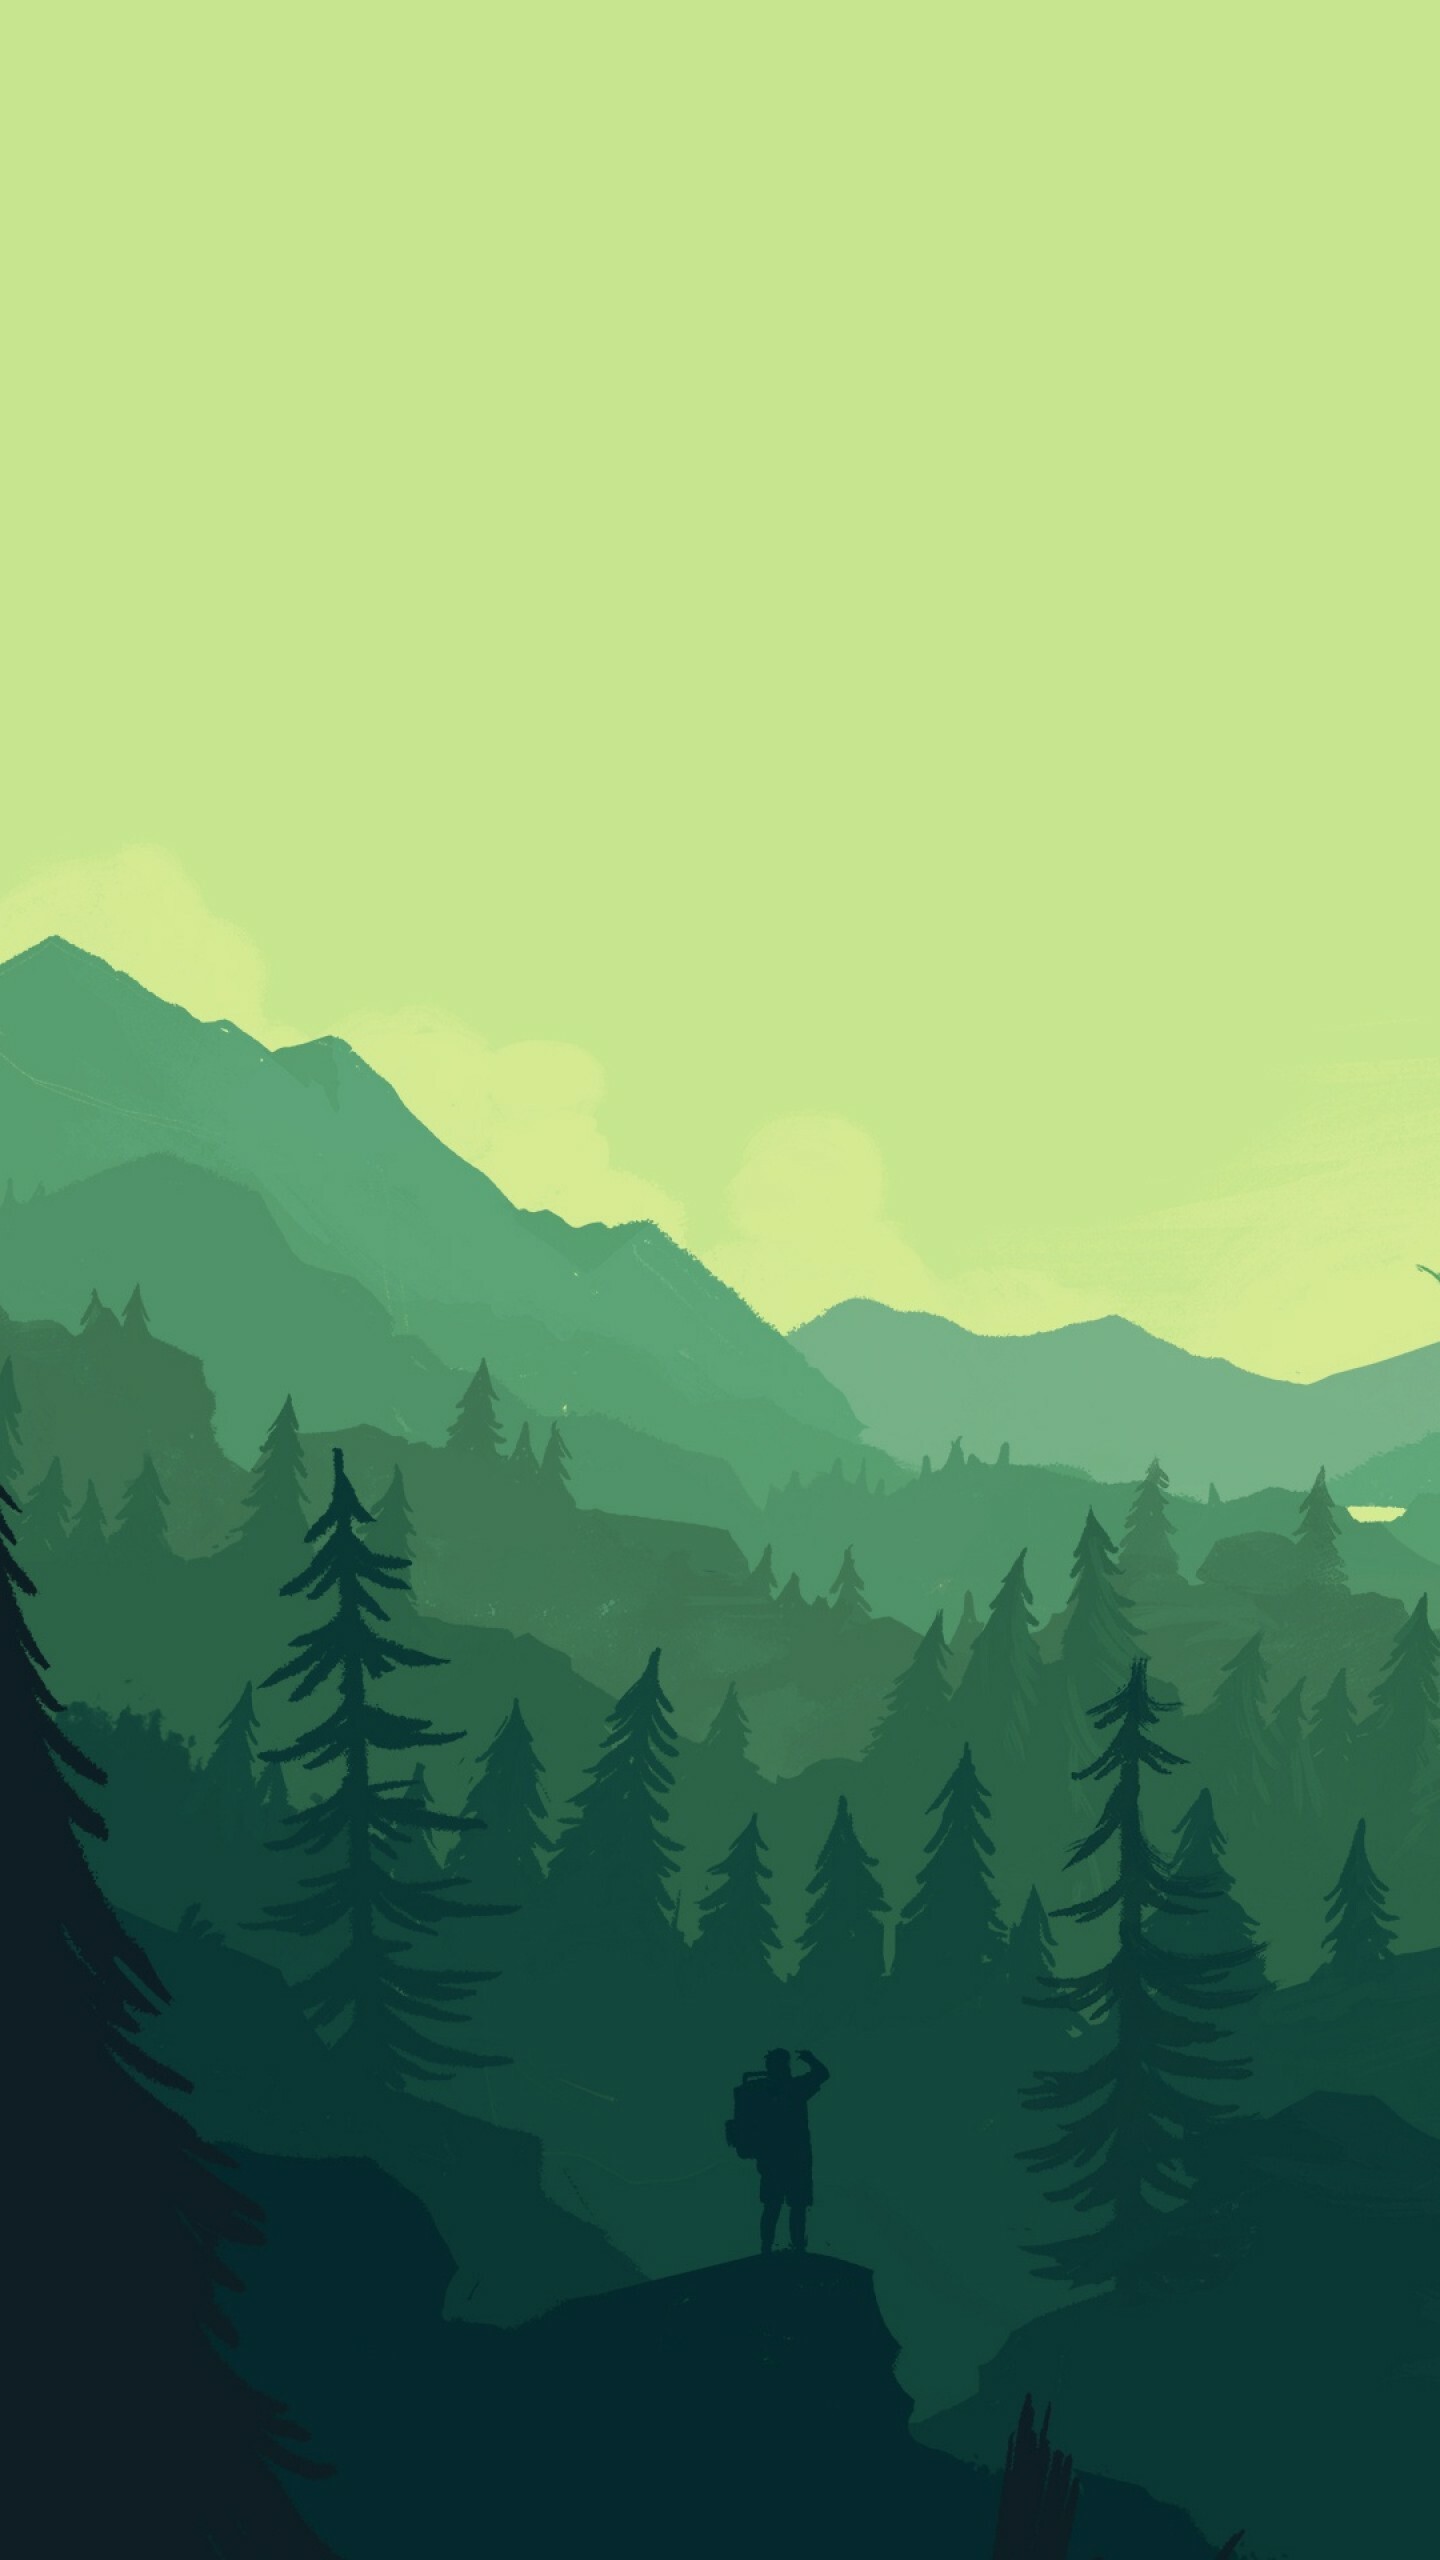 Firewatch: The first video game from Campo Santo, was created by Jake Rodkin and Sean Vanaman, who were the creative leads on The Walking Dead, Nels Anderson, the lead designer of Mark of the Ninja, and artist Olly Moss. 1440x2560 HD Background.